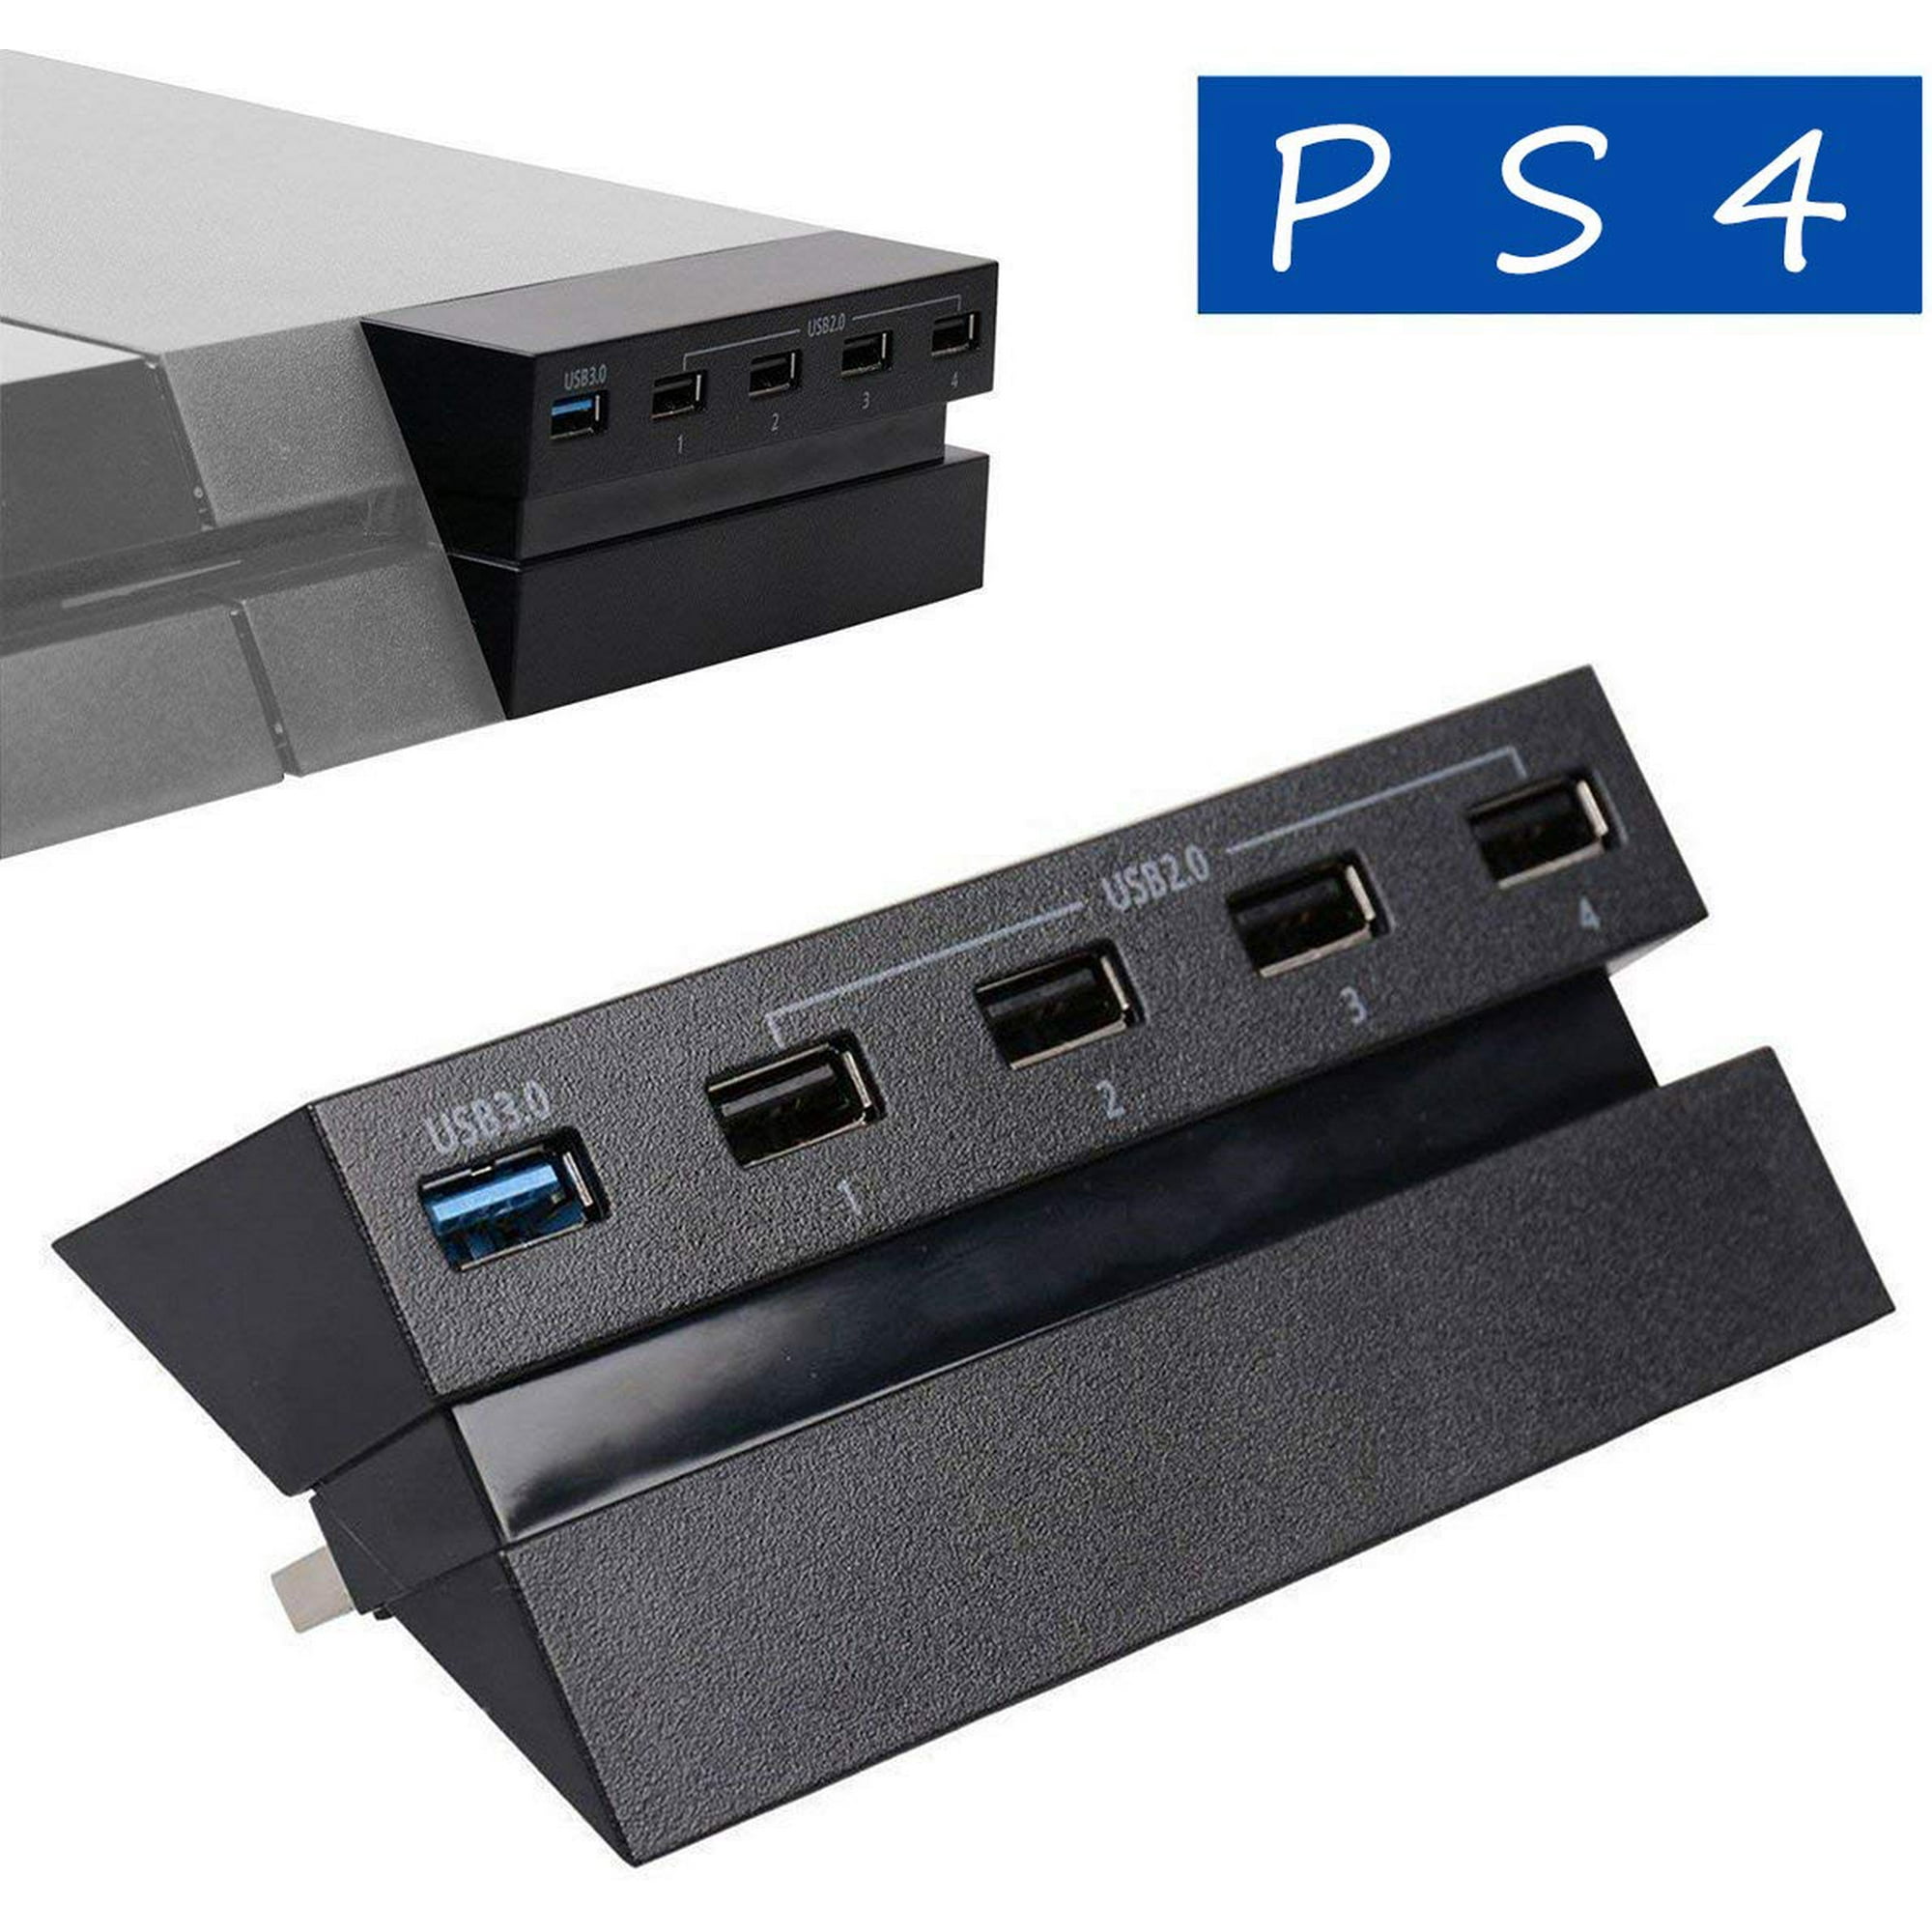 3.0 High Charger Controller Splitter Expansion for Playstation 4 PS4 Console, 5 Port for PS4, Not for PS4 Slim, PS4 PRO | Walmart Canada